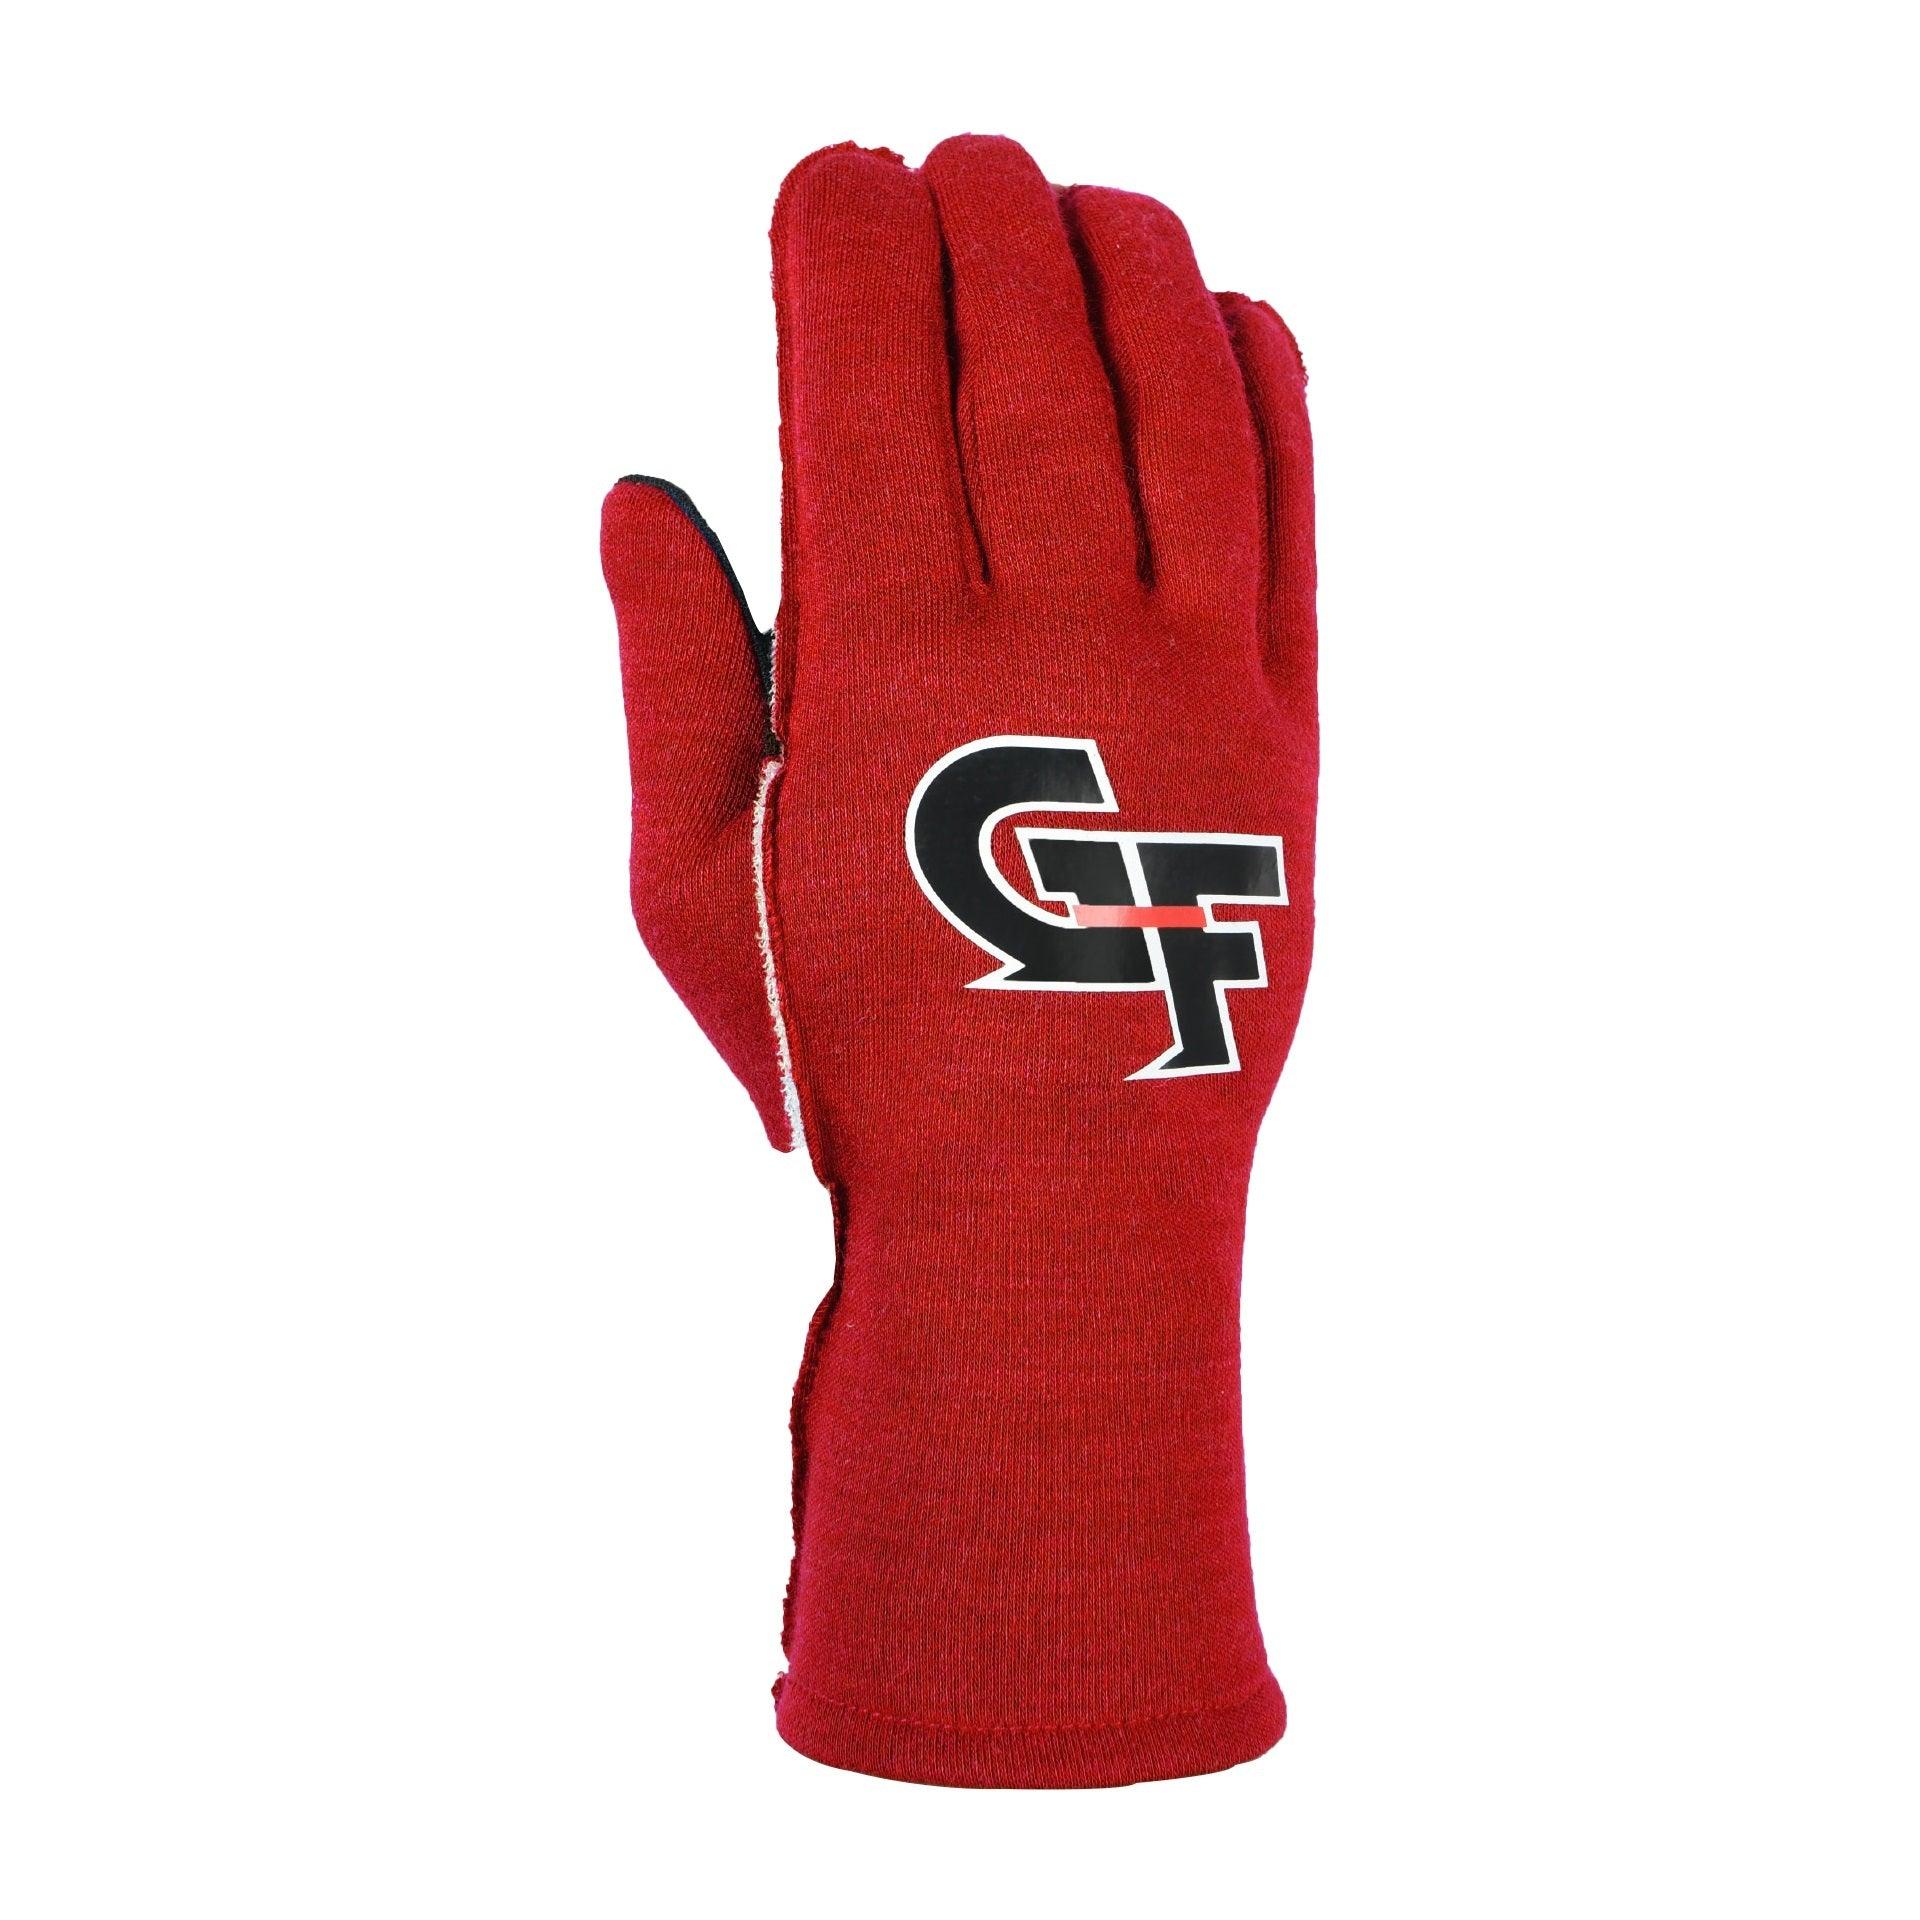 Gloves G-Limit Large Red - Burlile Performance Products